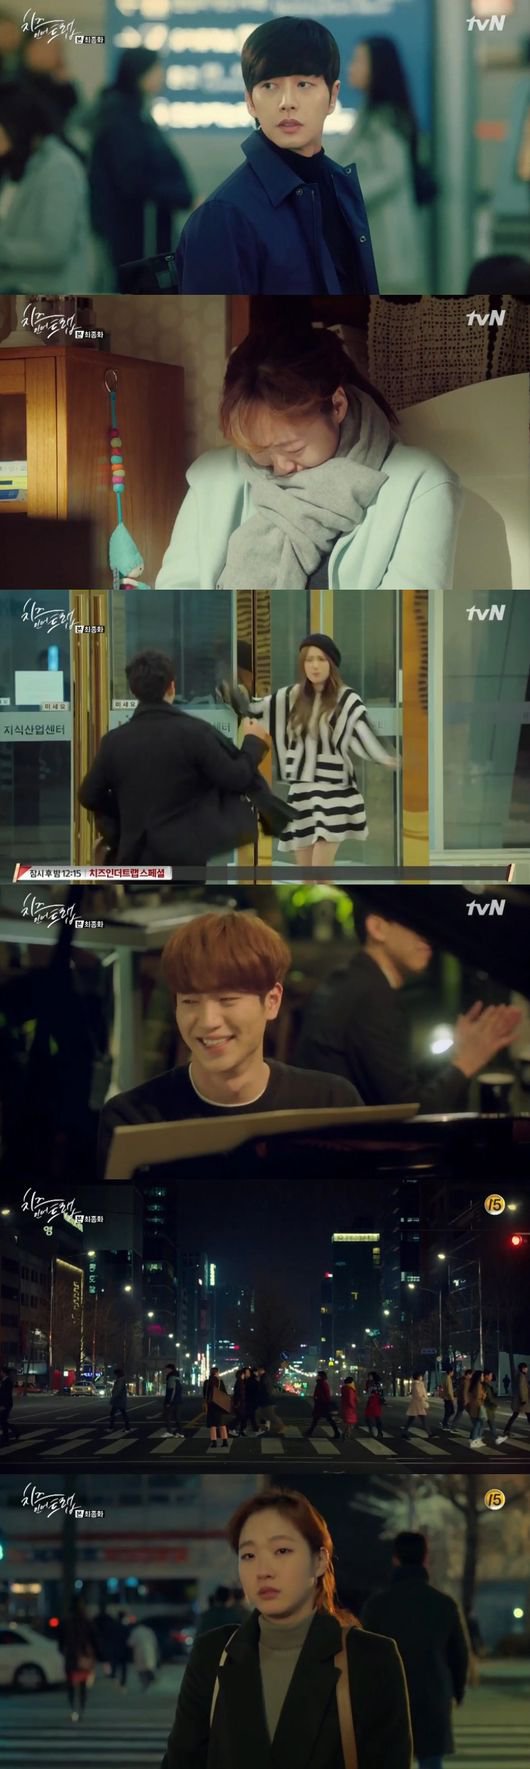 Nggak Happy Ending, Rating Drama 'Cheese in the Trap 